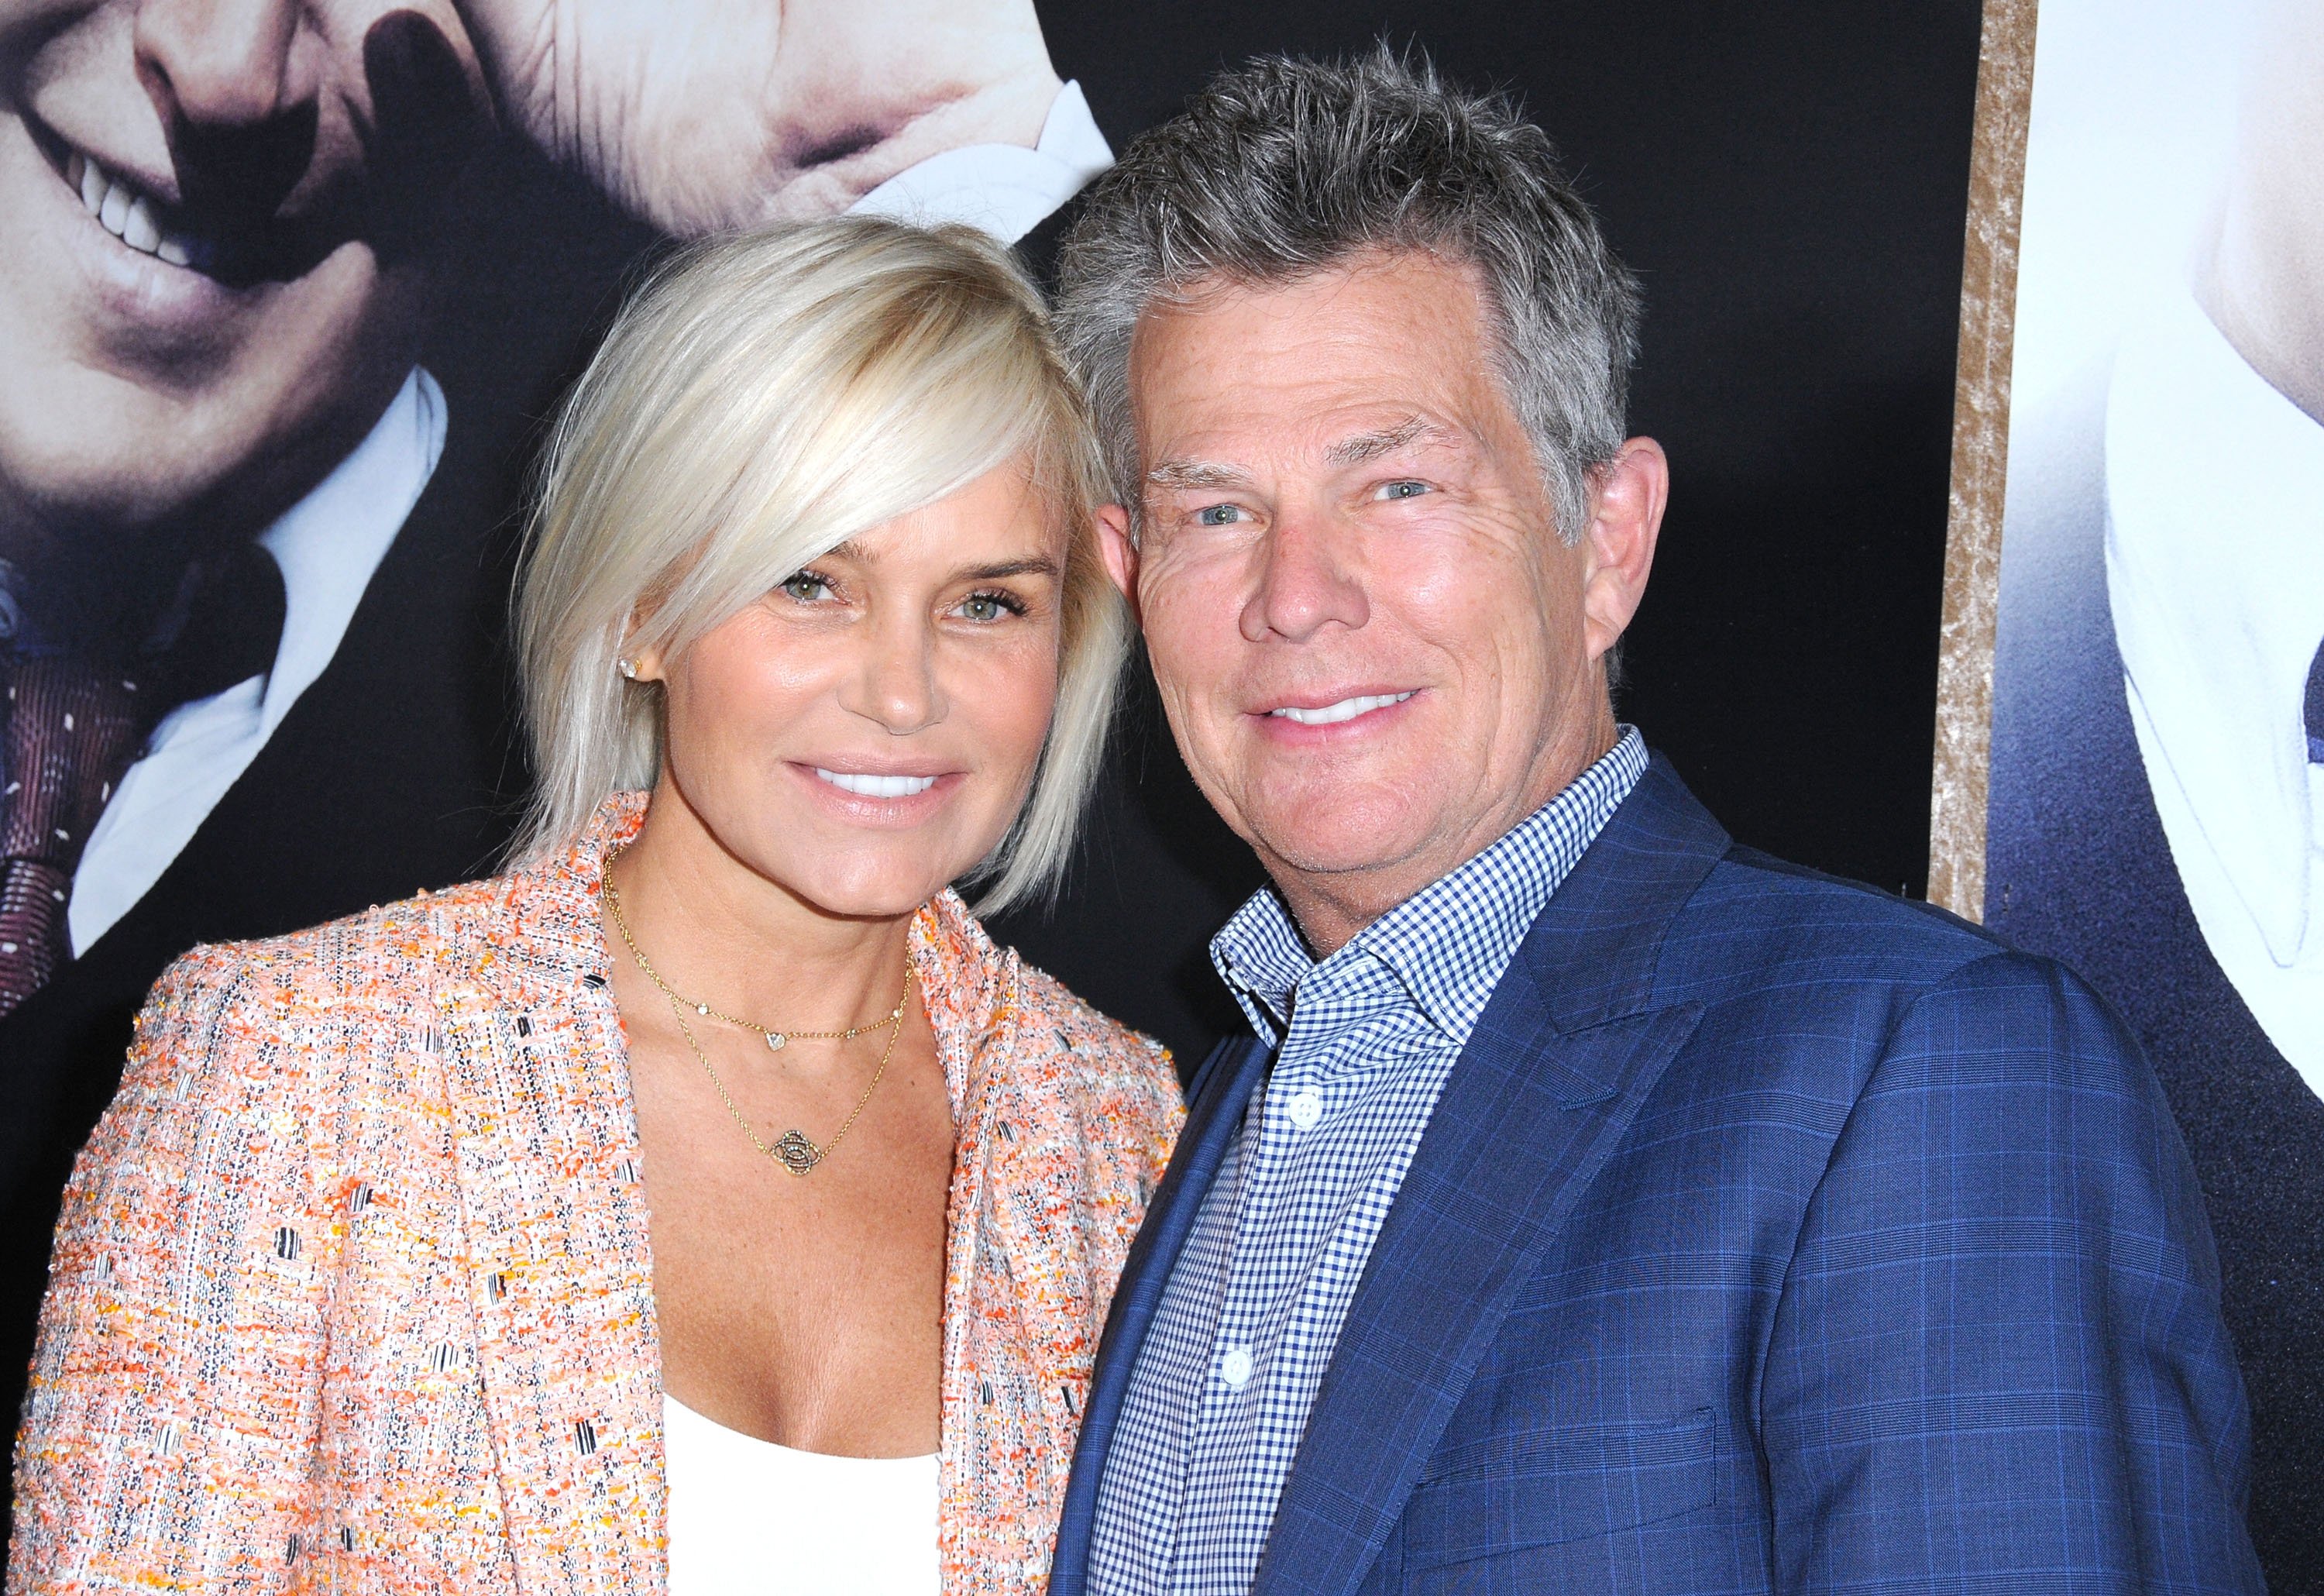 David Foster with his wife Yolanda Hadid on April 17, 2014 at the Ray Kurtzman Theatre in Los Angeles California.  | Source: Getty Images